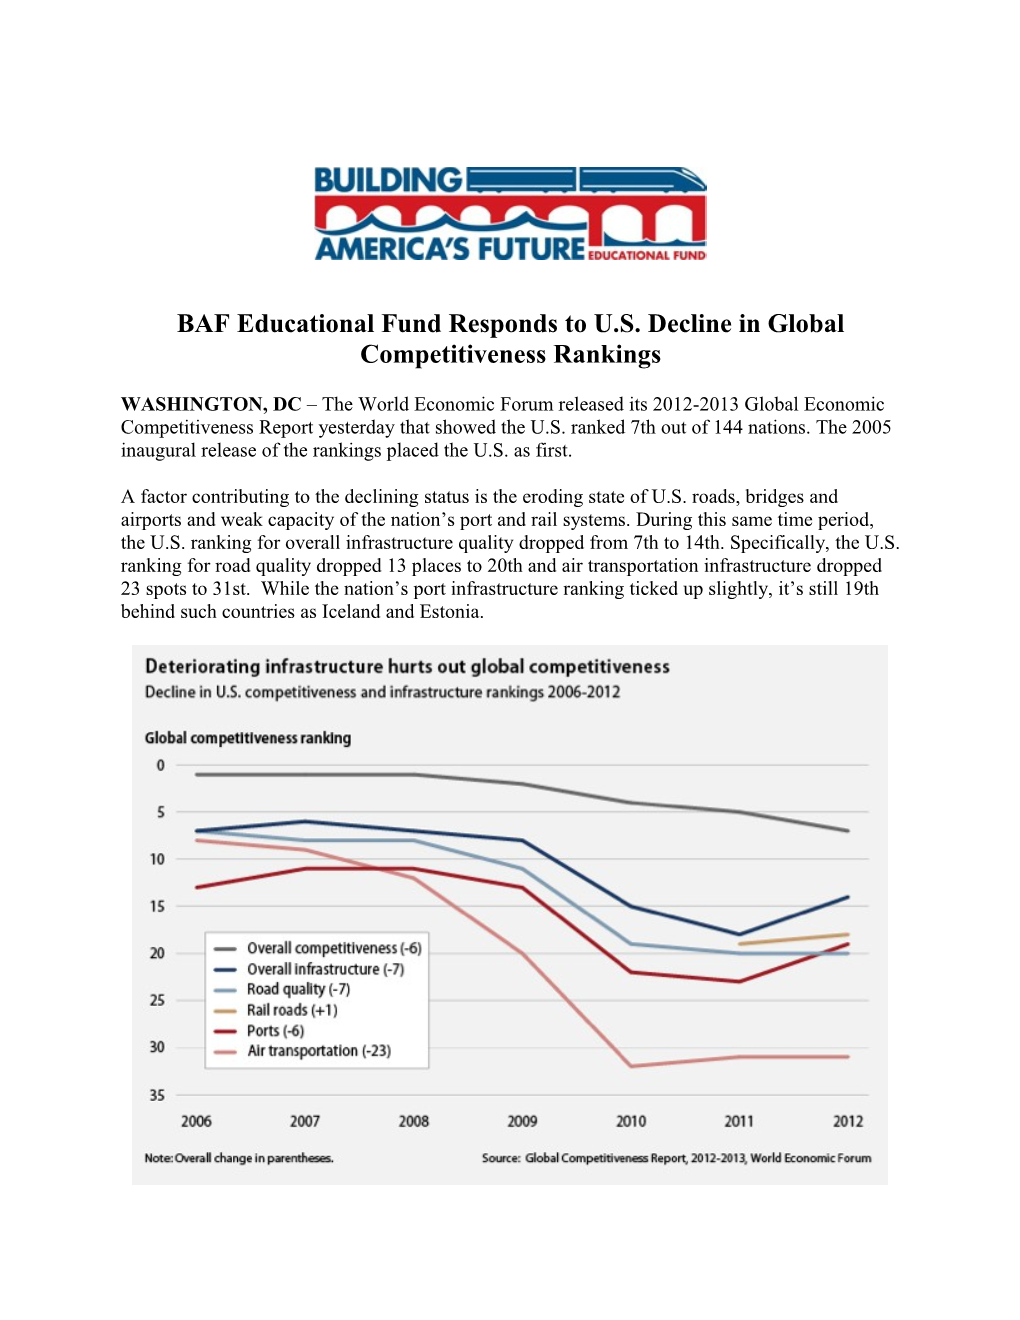 BAF Educational Fund Responds to U.S. Decline in Global Competitiveness Rankings